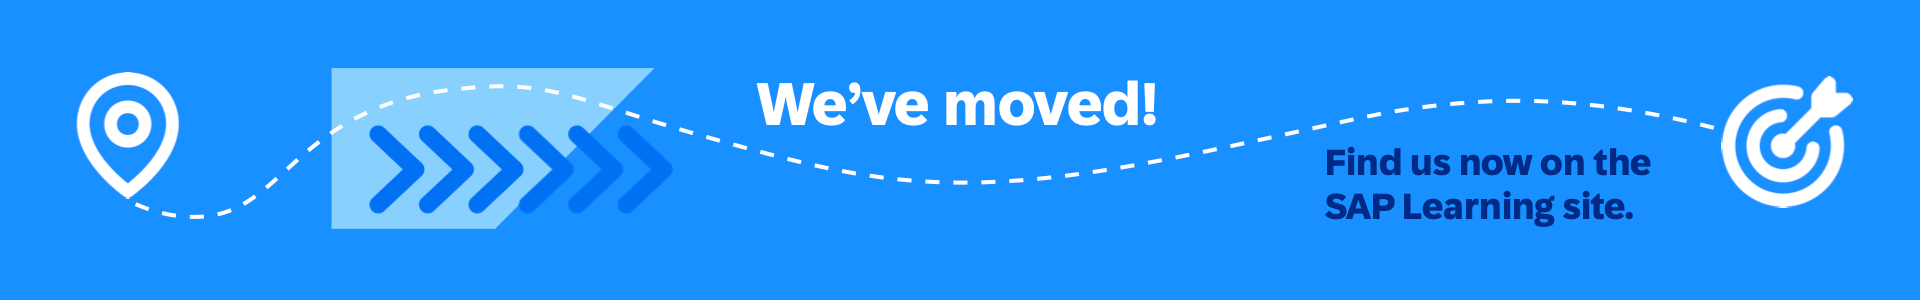 We've moved! Find us now on the SAP Learning site.